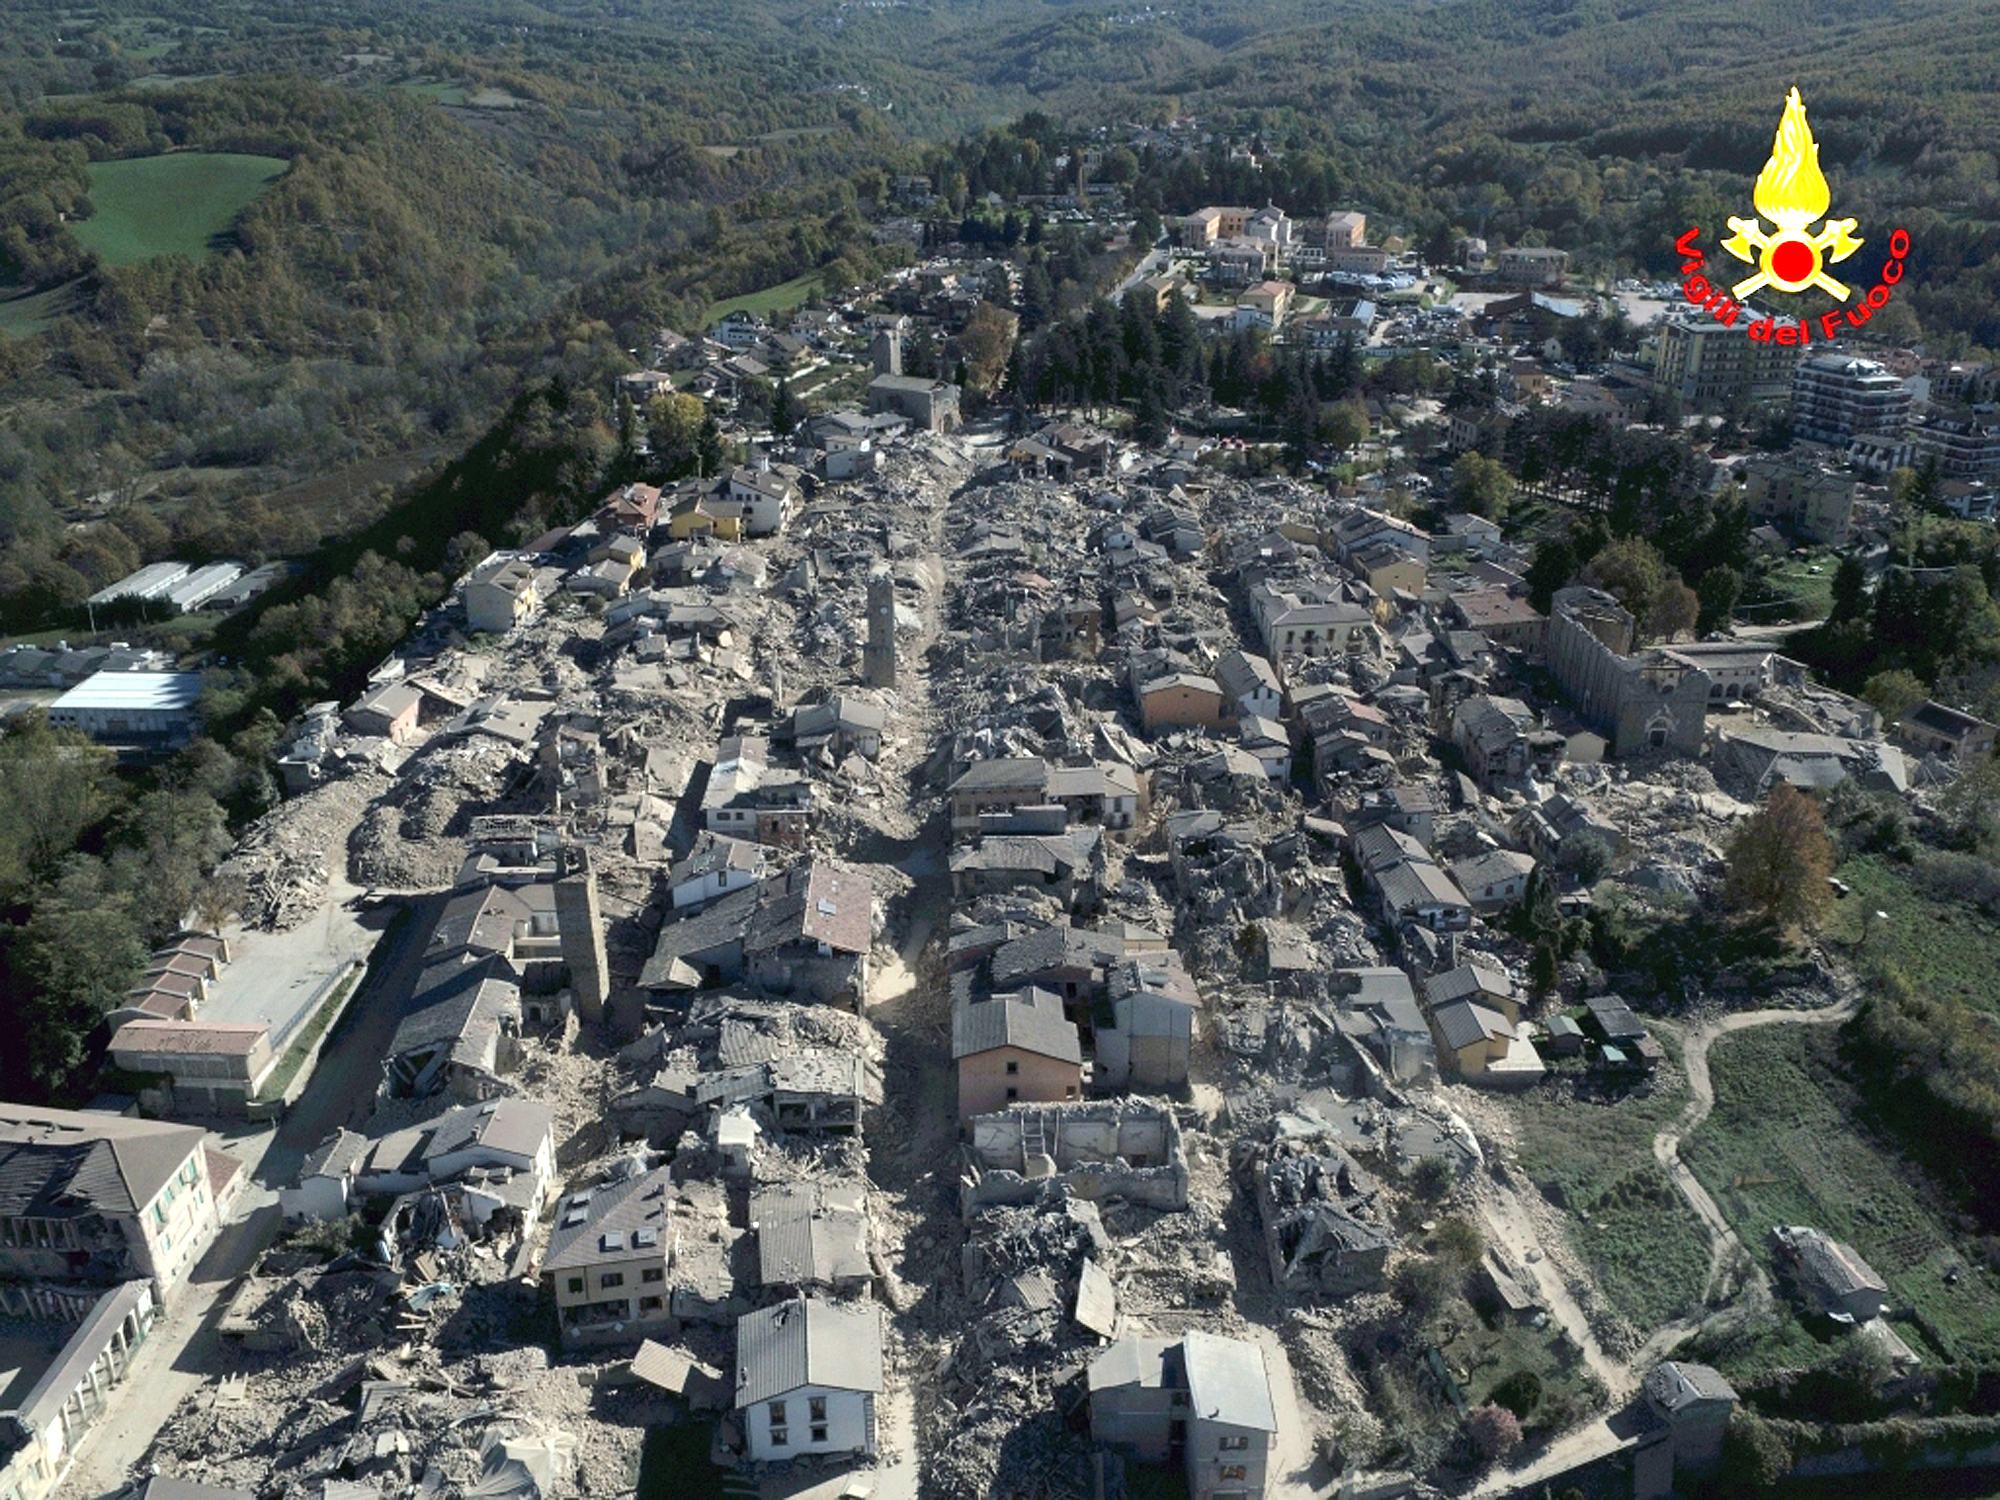 Drone footage shows devastating aftermath of Italy earthquake - SFGate2000 x 1500